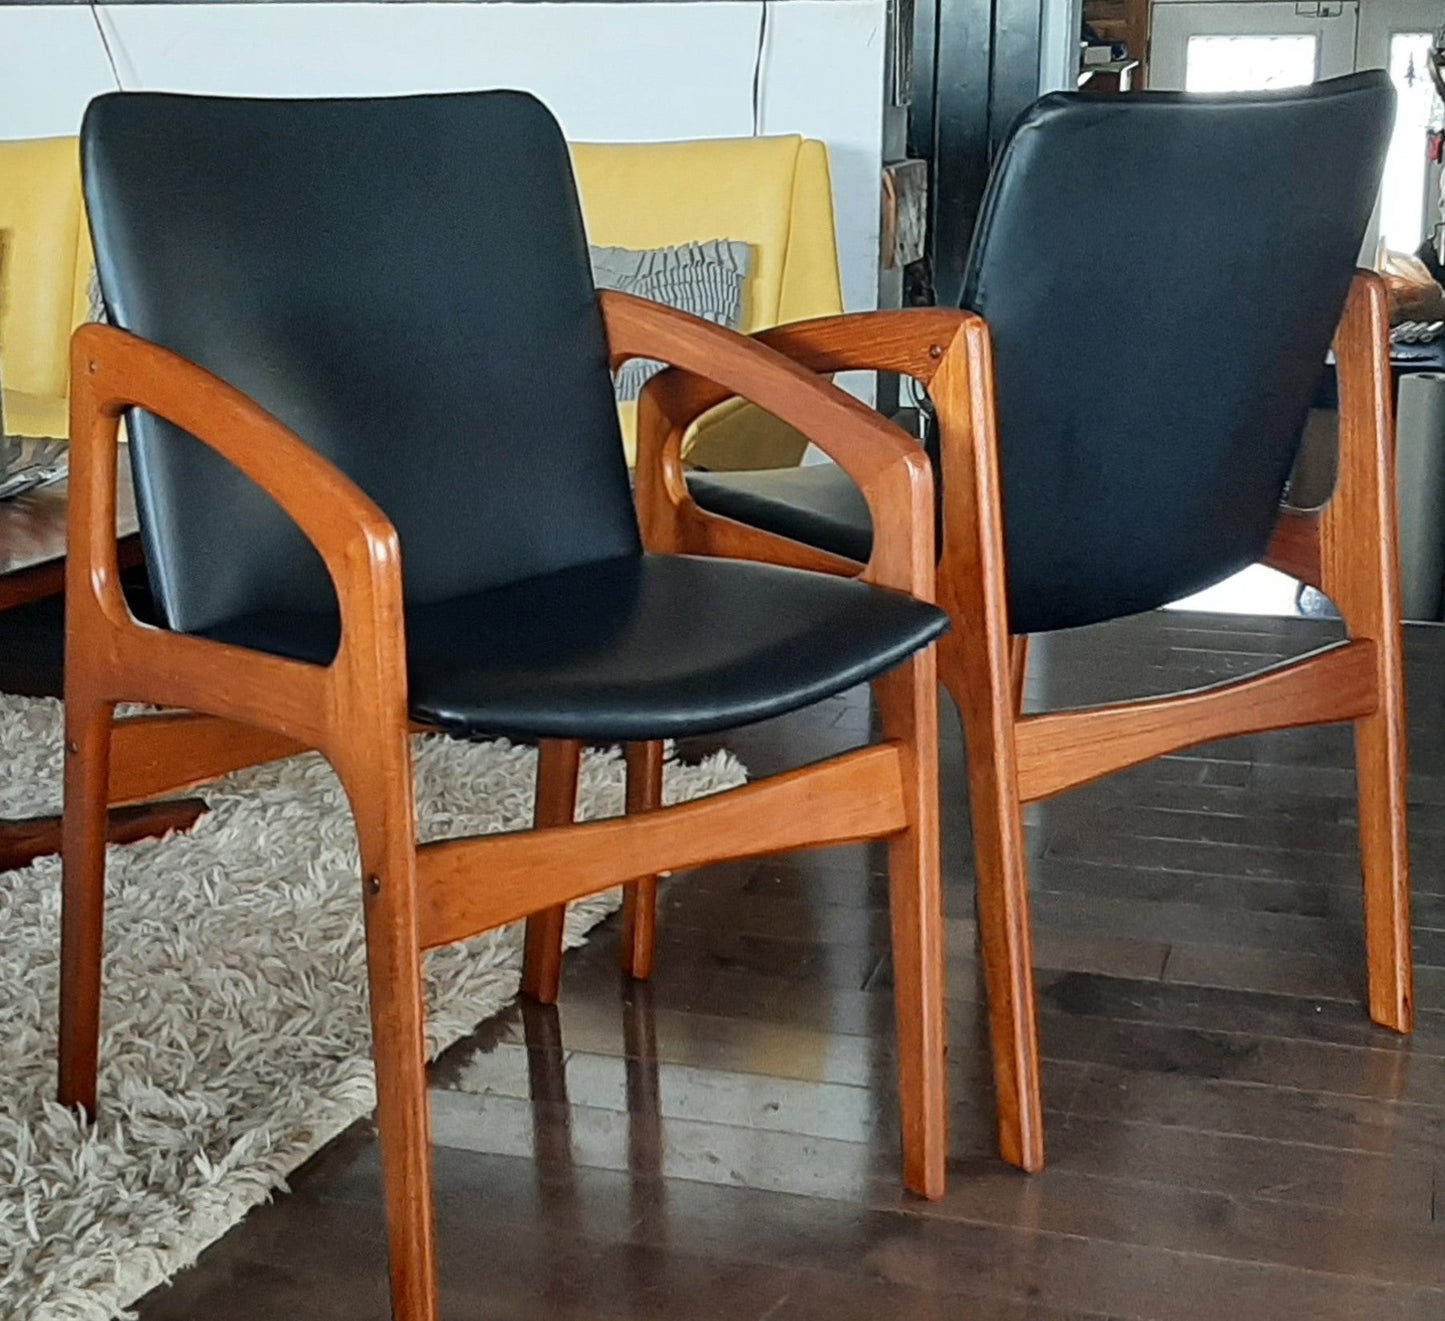 2 REFINISHED REUPHOLSTERED Danish Mid Century Modern Angled Armchairs (have more chairs)